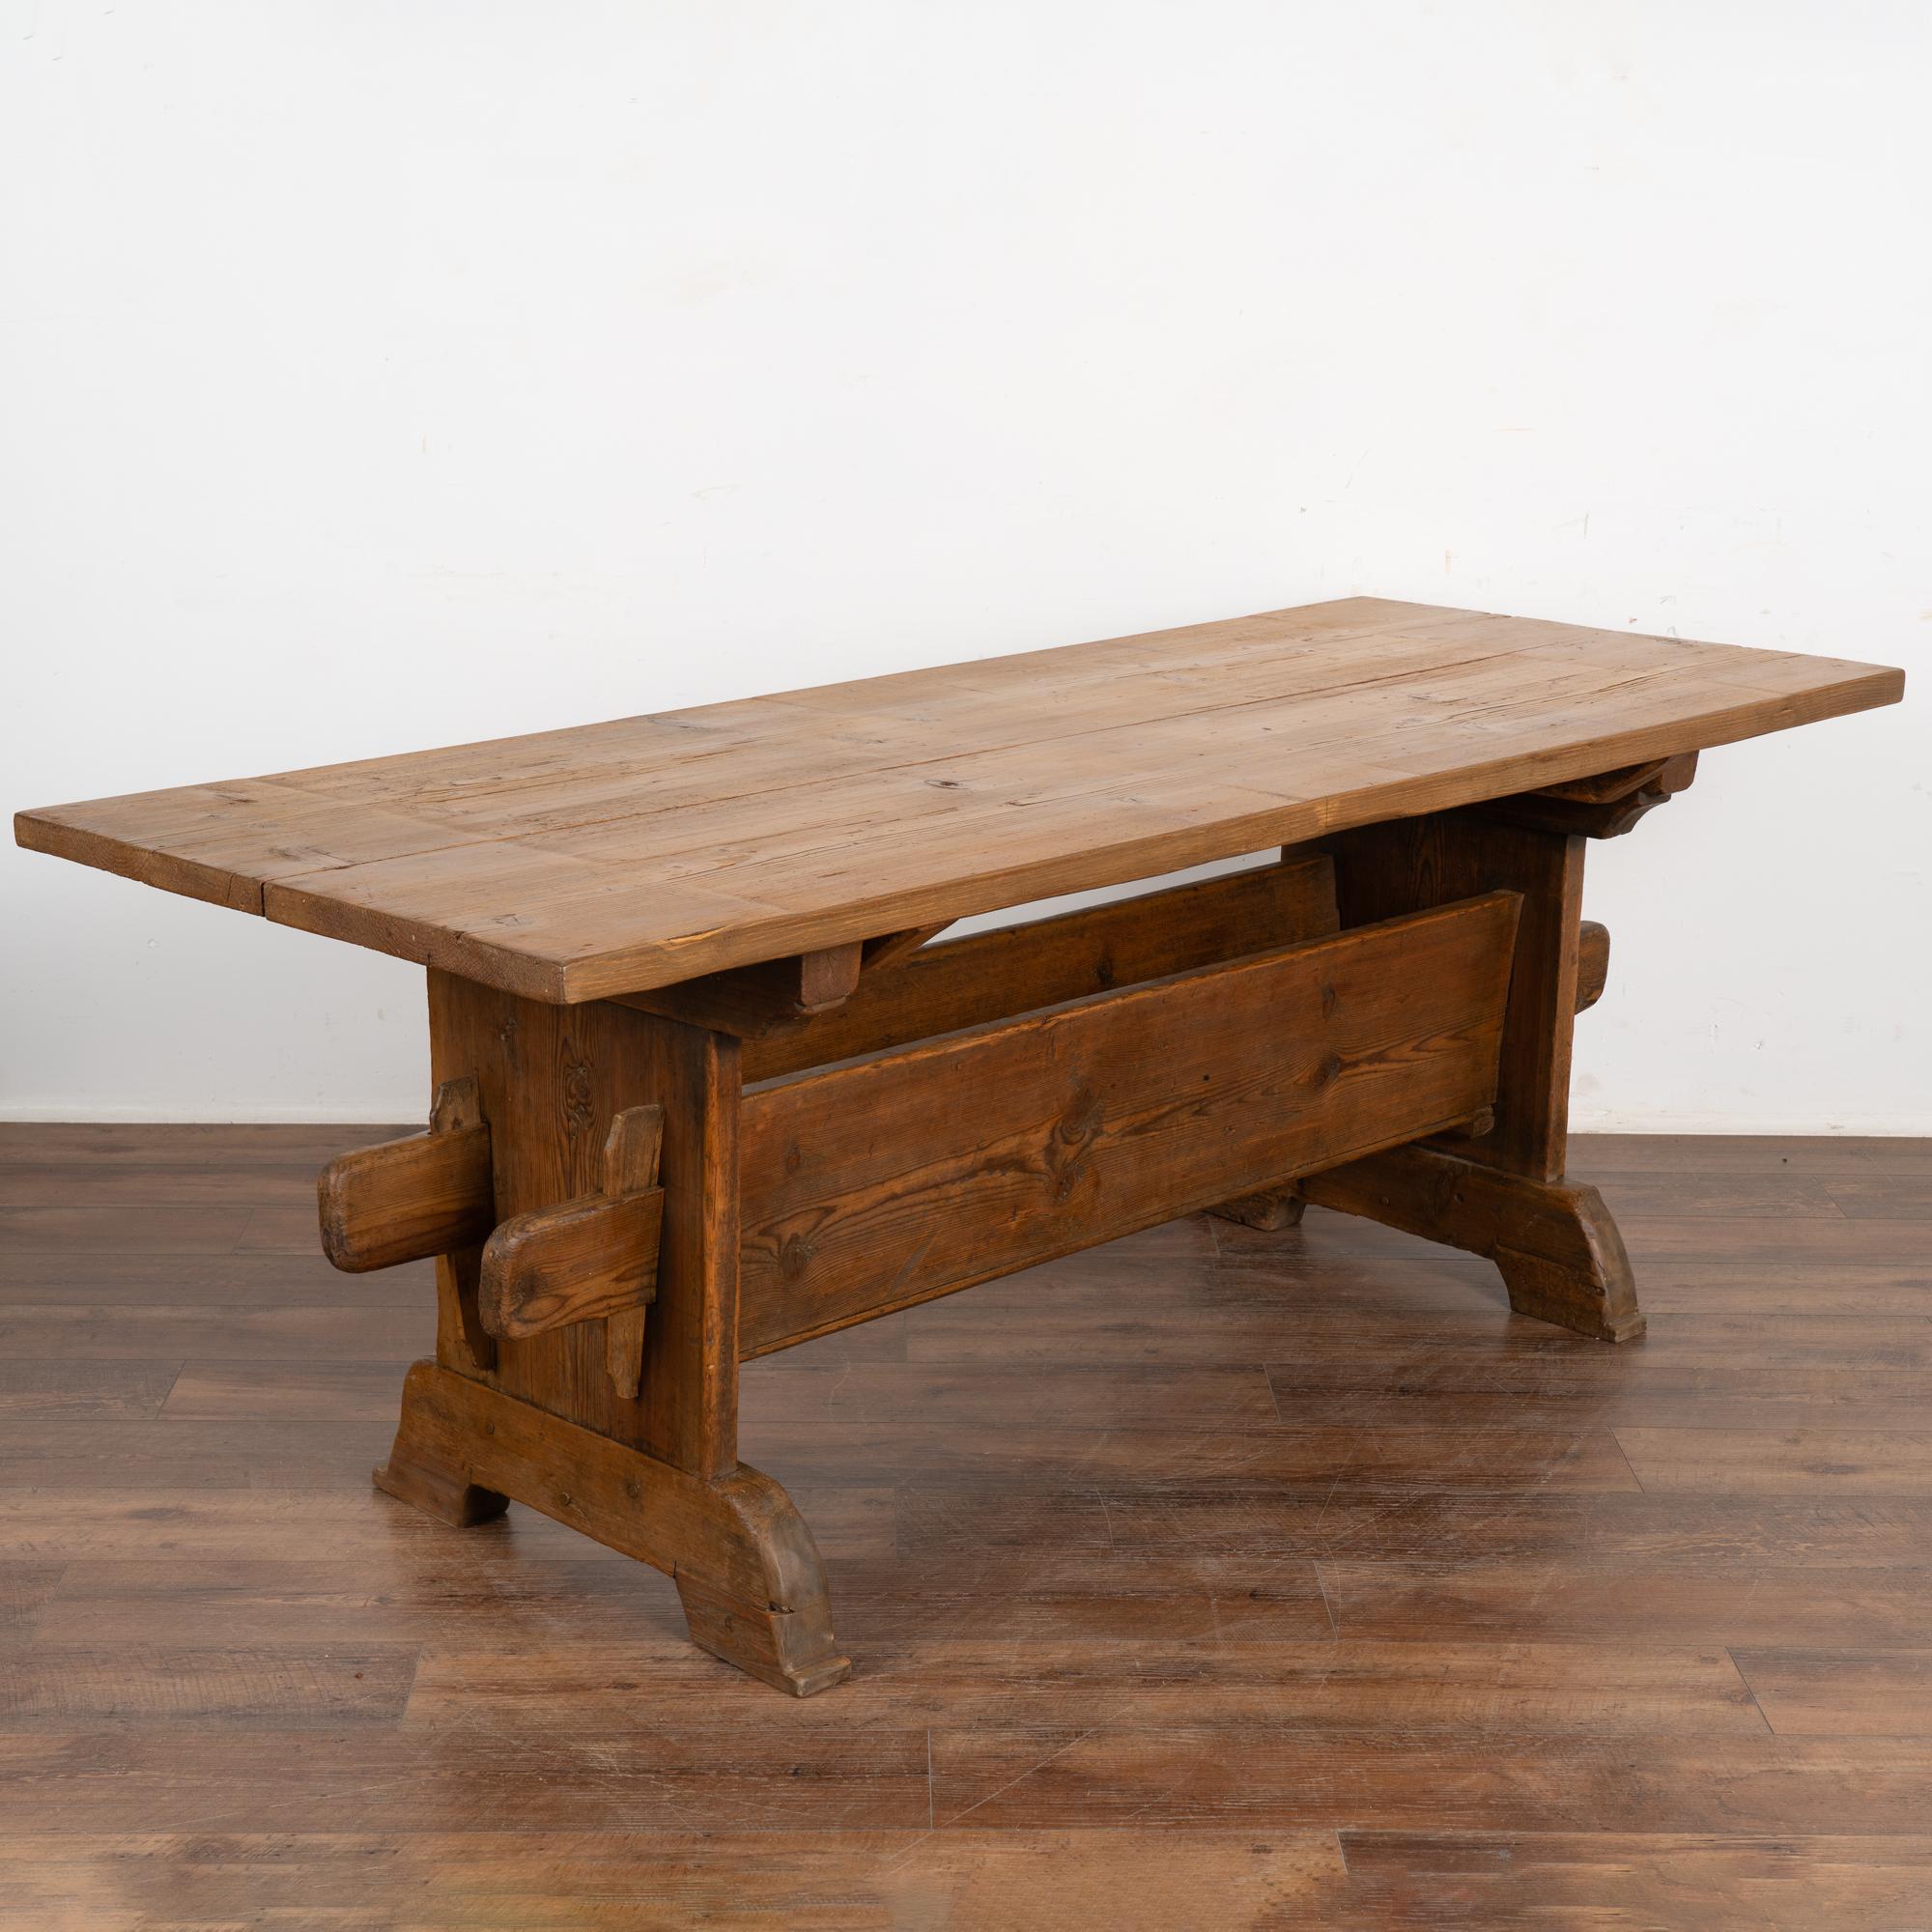 Antique Pine Farm Kitchen Dining Table, Sweden circa 1800-20 For Sale 2